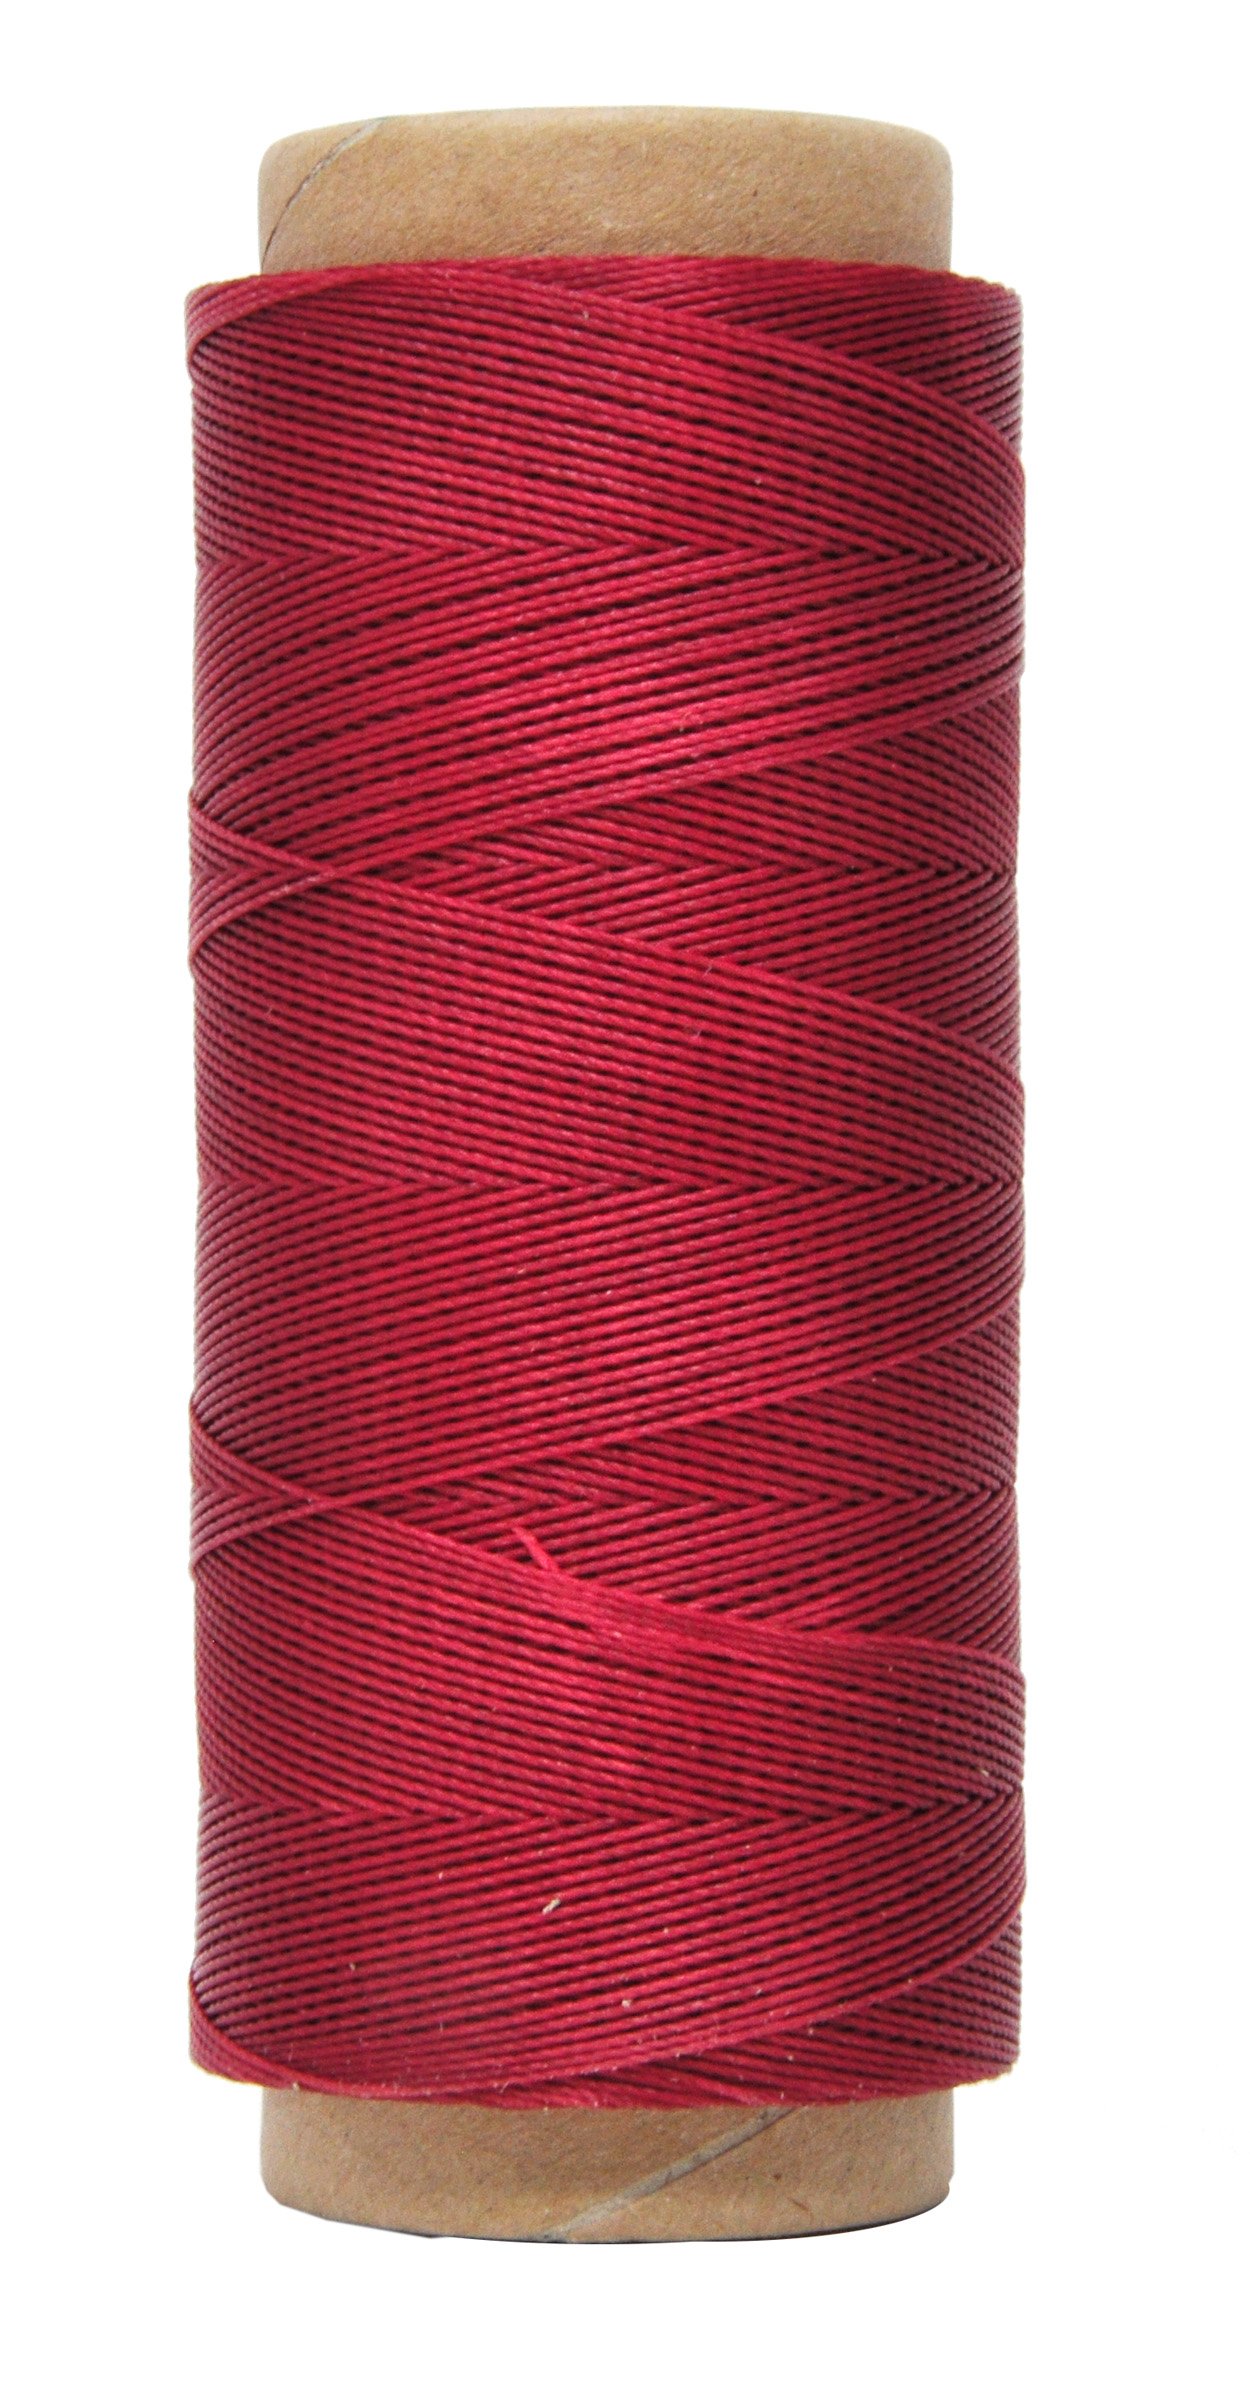 Round Waxed Thread for Leather Sewing - Leather Thread Wax String Polyester  Cord for Leather Craft Stitching Bookbinding by Mandala Crafts 0.45mm 219